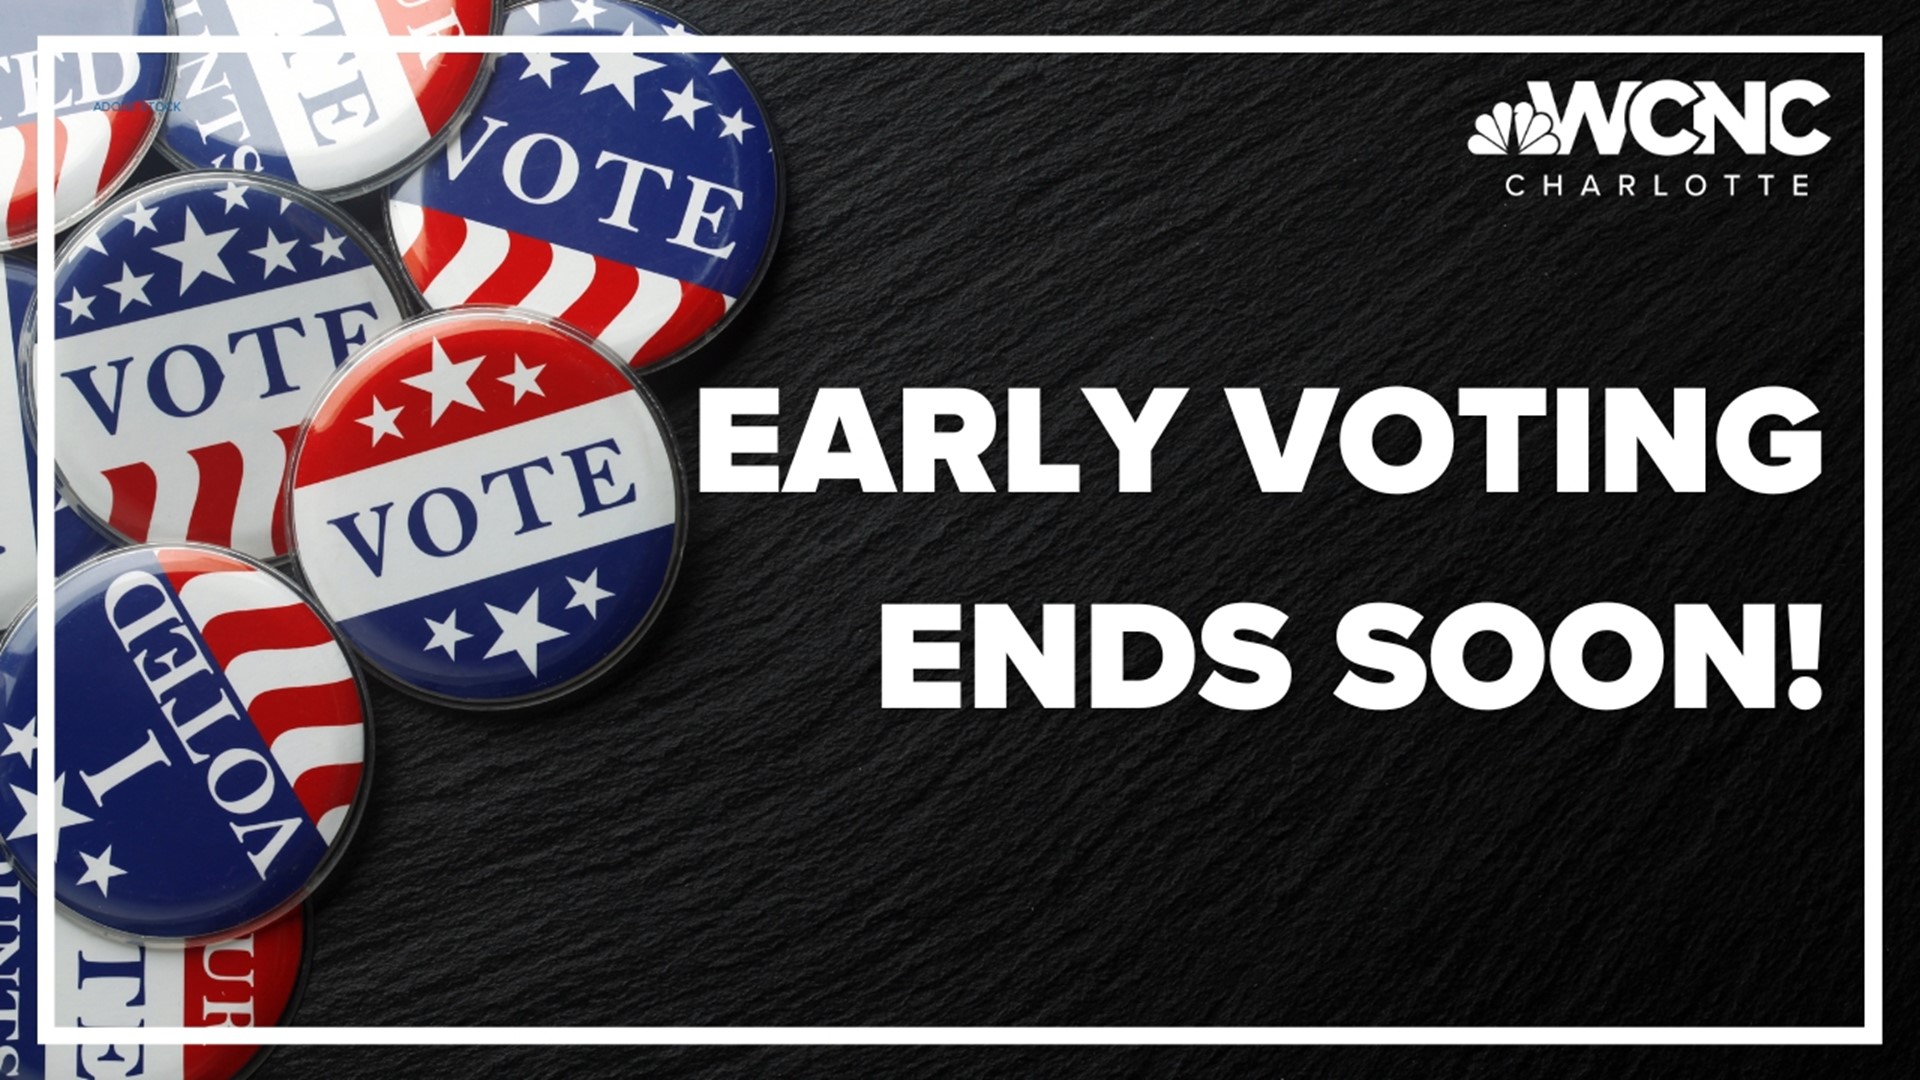 Time is running out if you want to beat the crowds and vote before Tuesday.